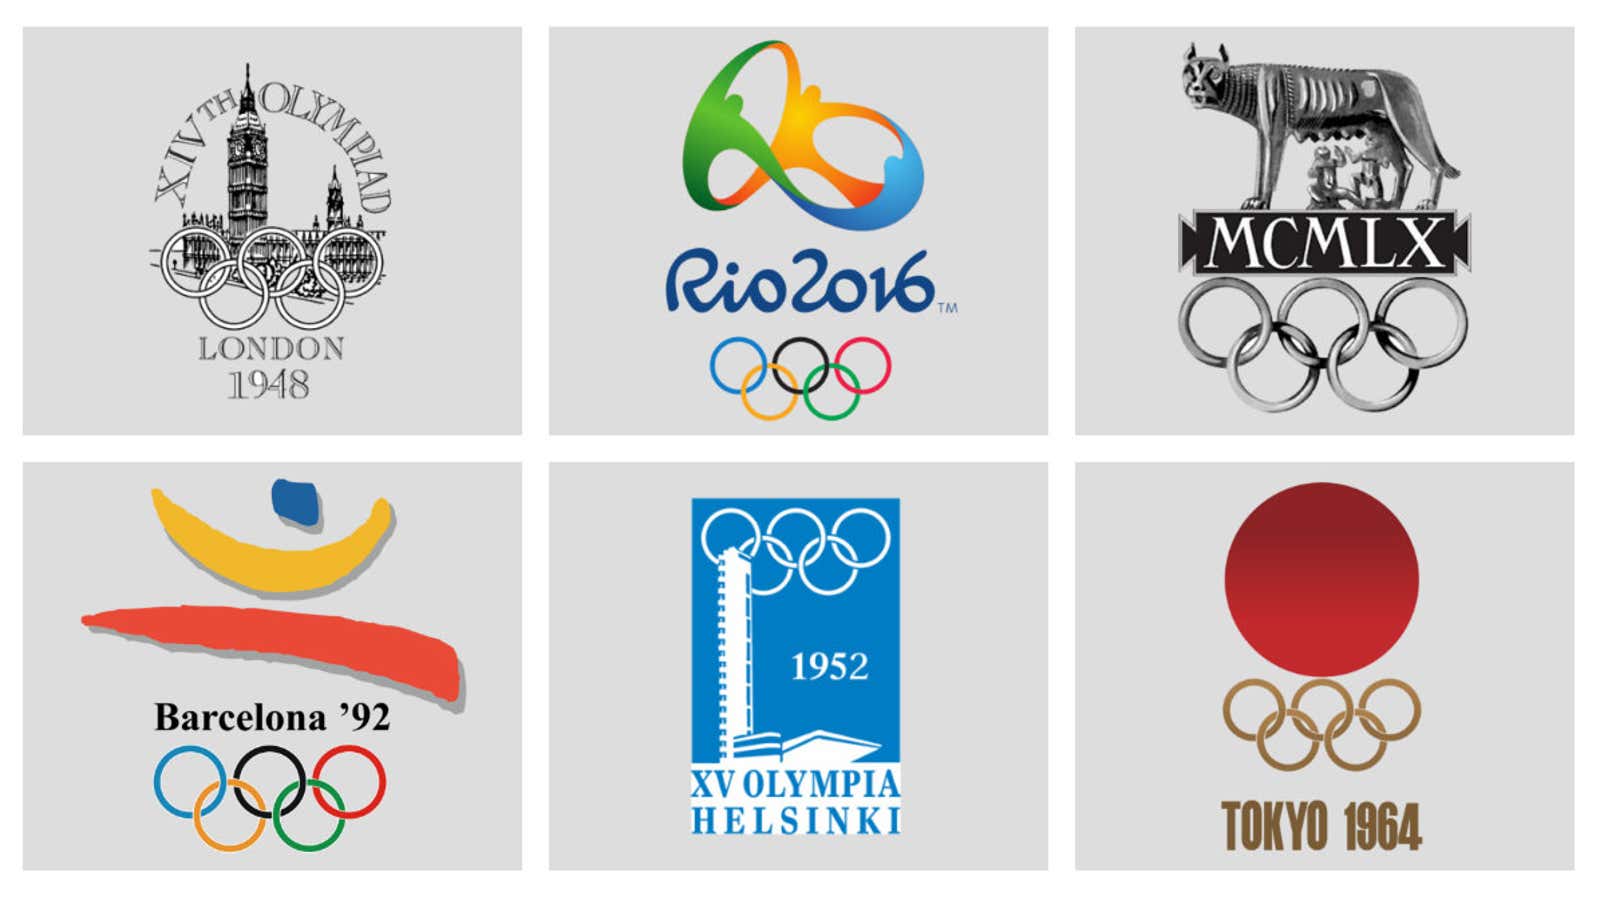 Logos go for the gold.